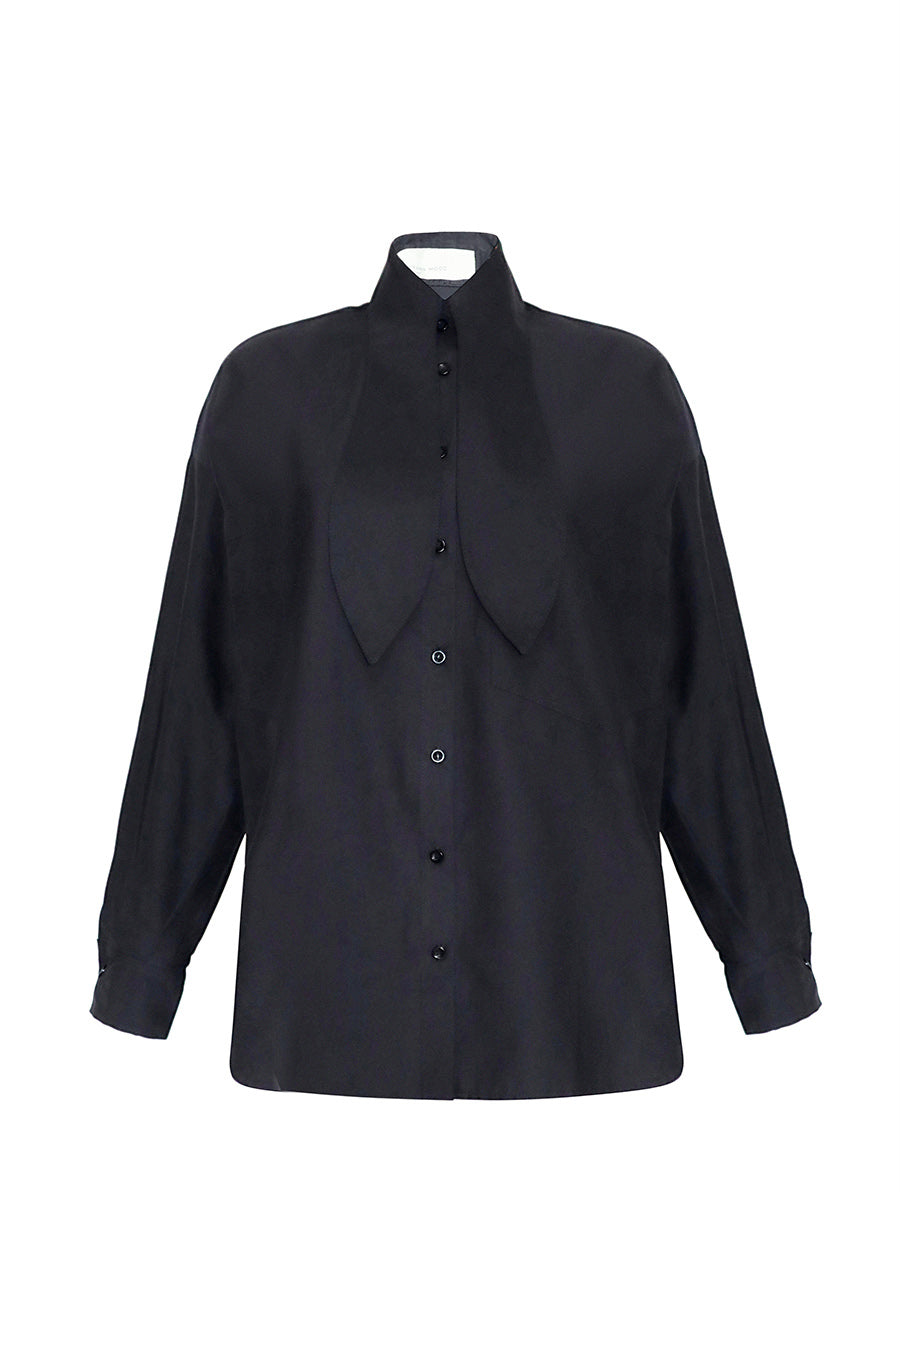 OM Shirt With Bow Tie Collar - Black